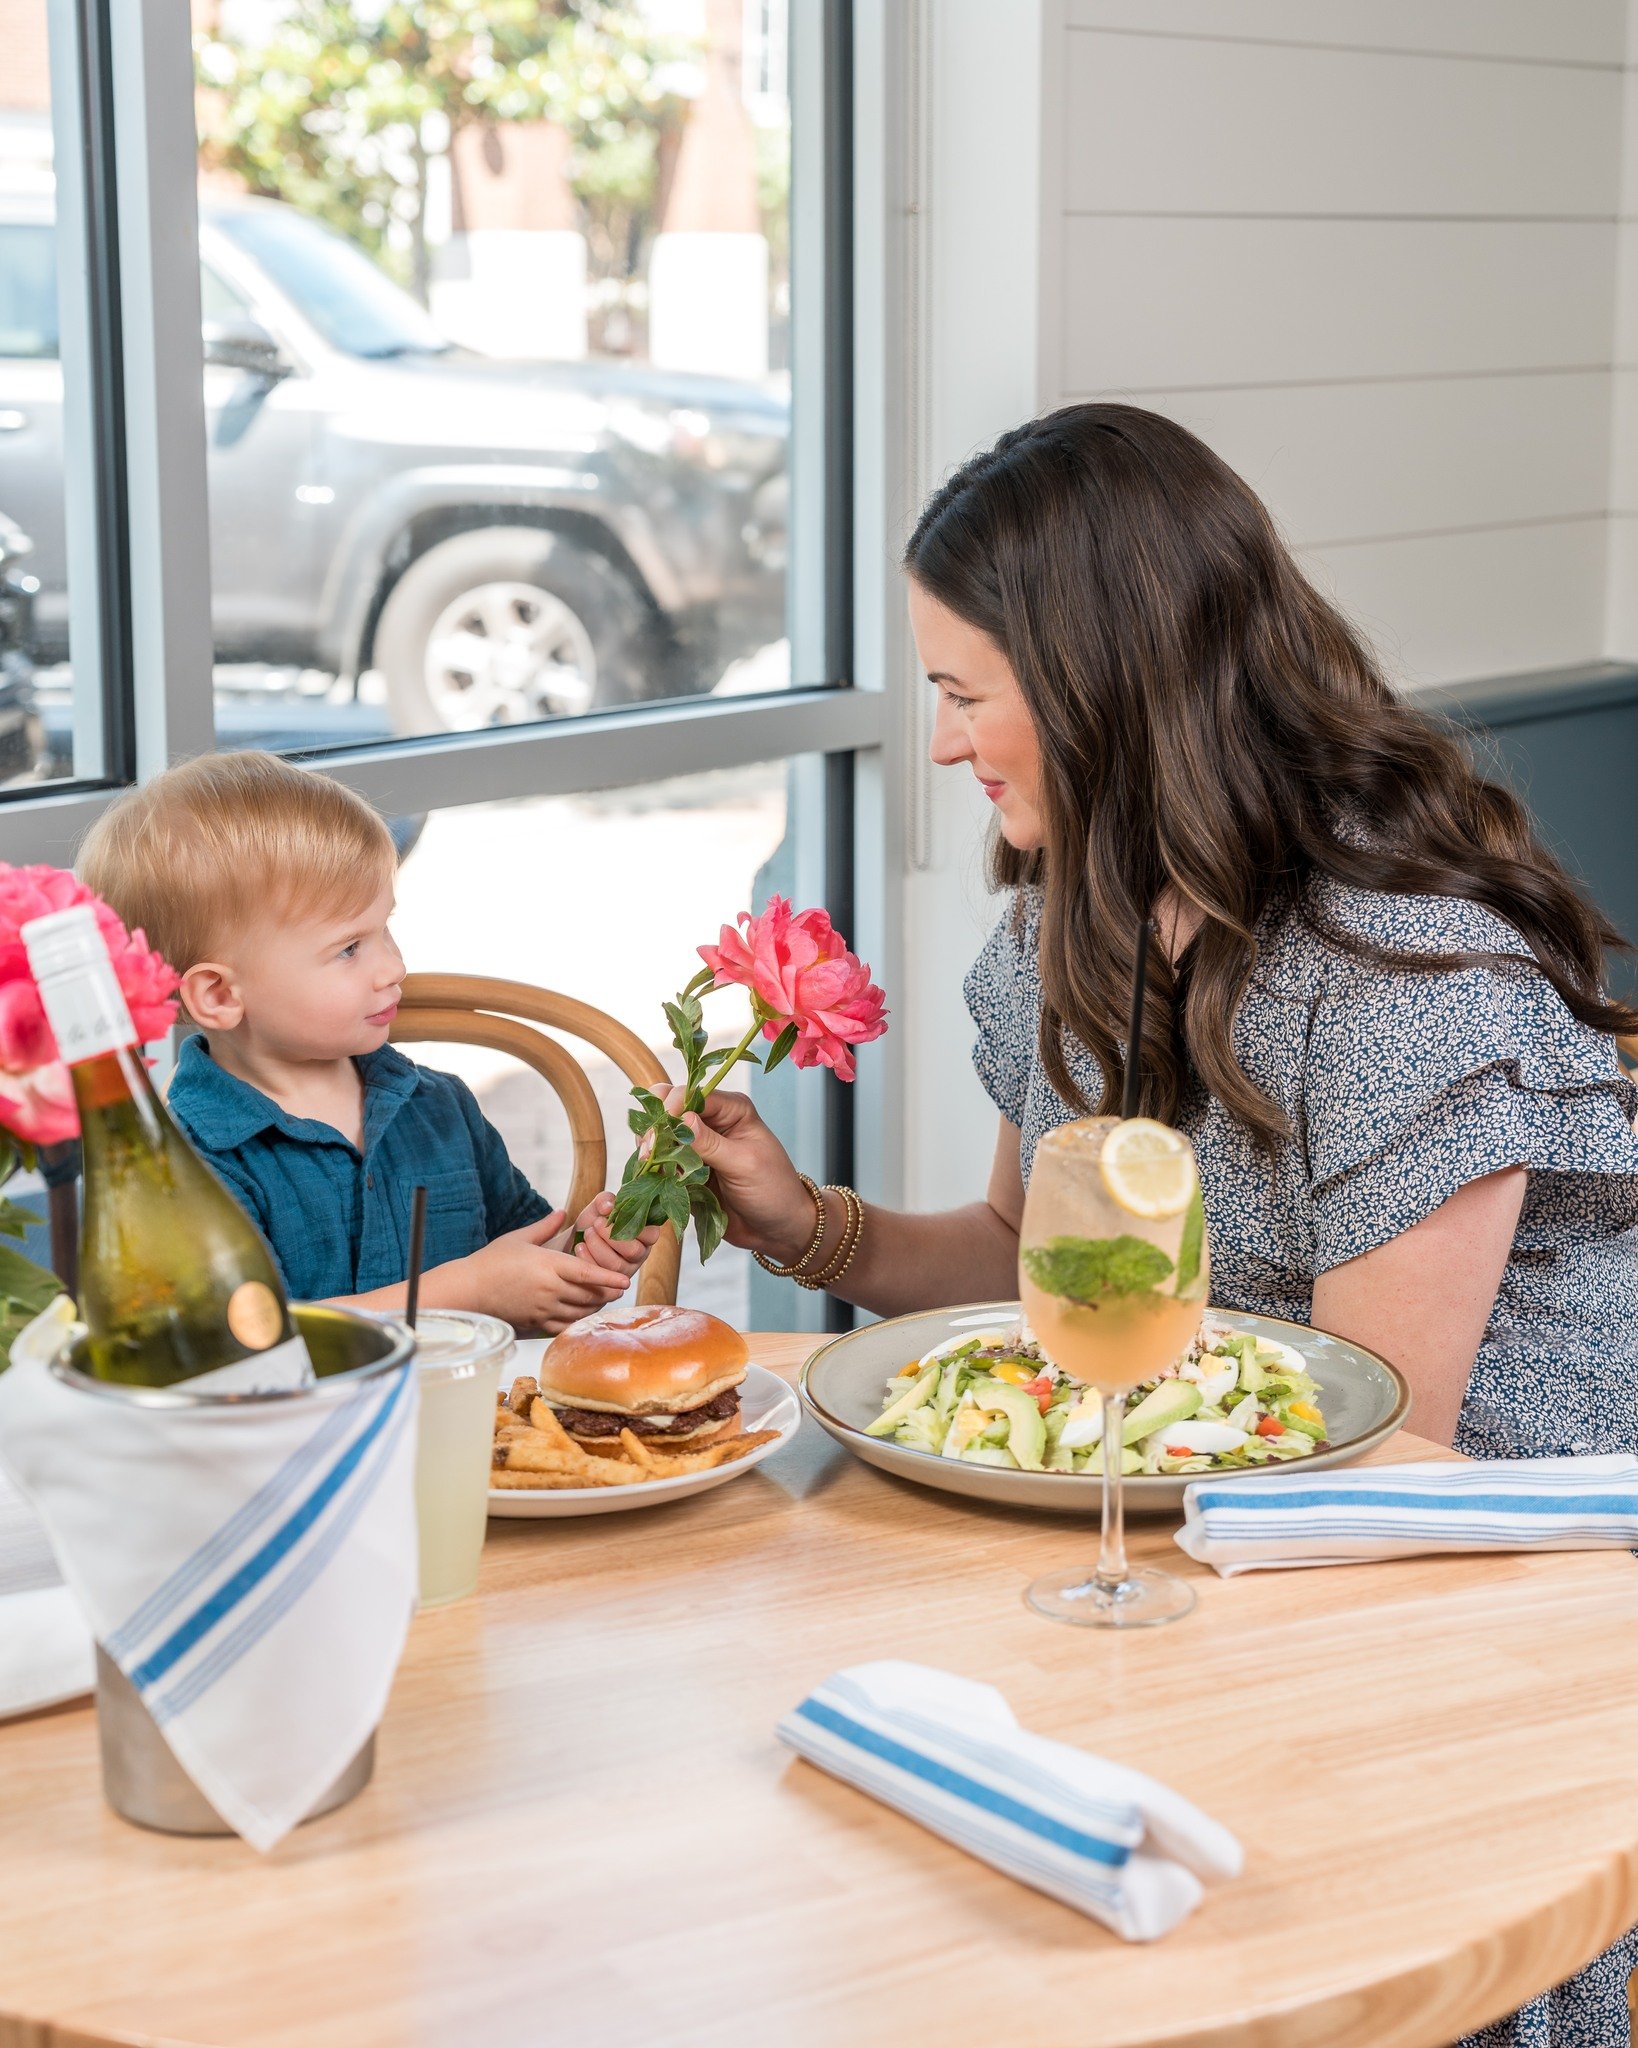 Treat Mom to a dinner reservation at Rae's!  Reservations are available from 3pm to 10pm for her favorite dishes, cocktails, and good times on the Northside. 

To make the holiday extra special, our bartenders have come up with three delicious season